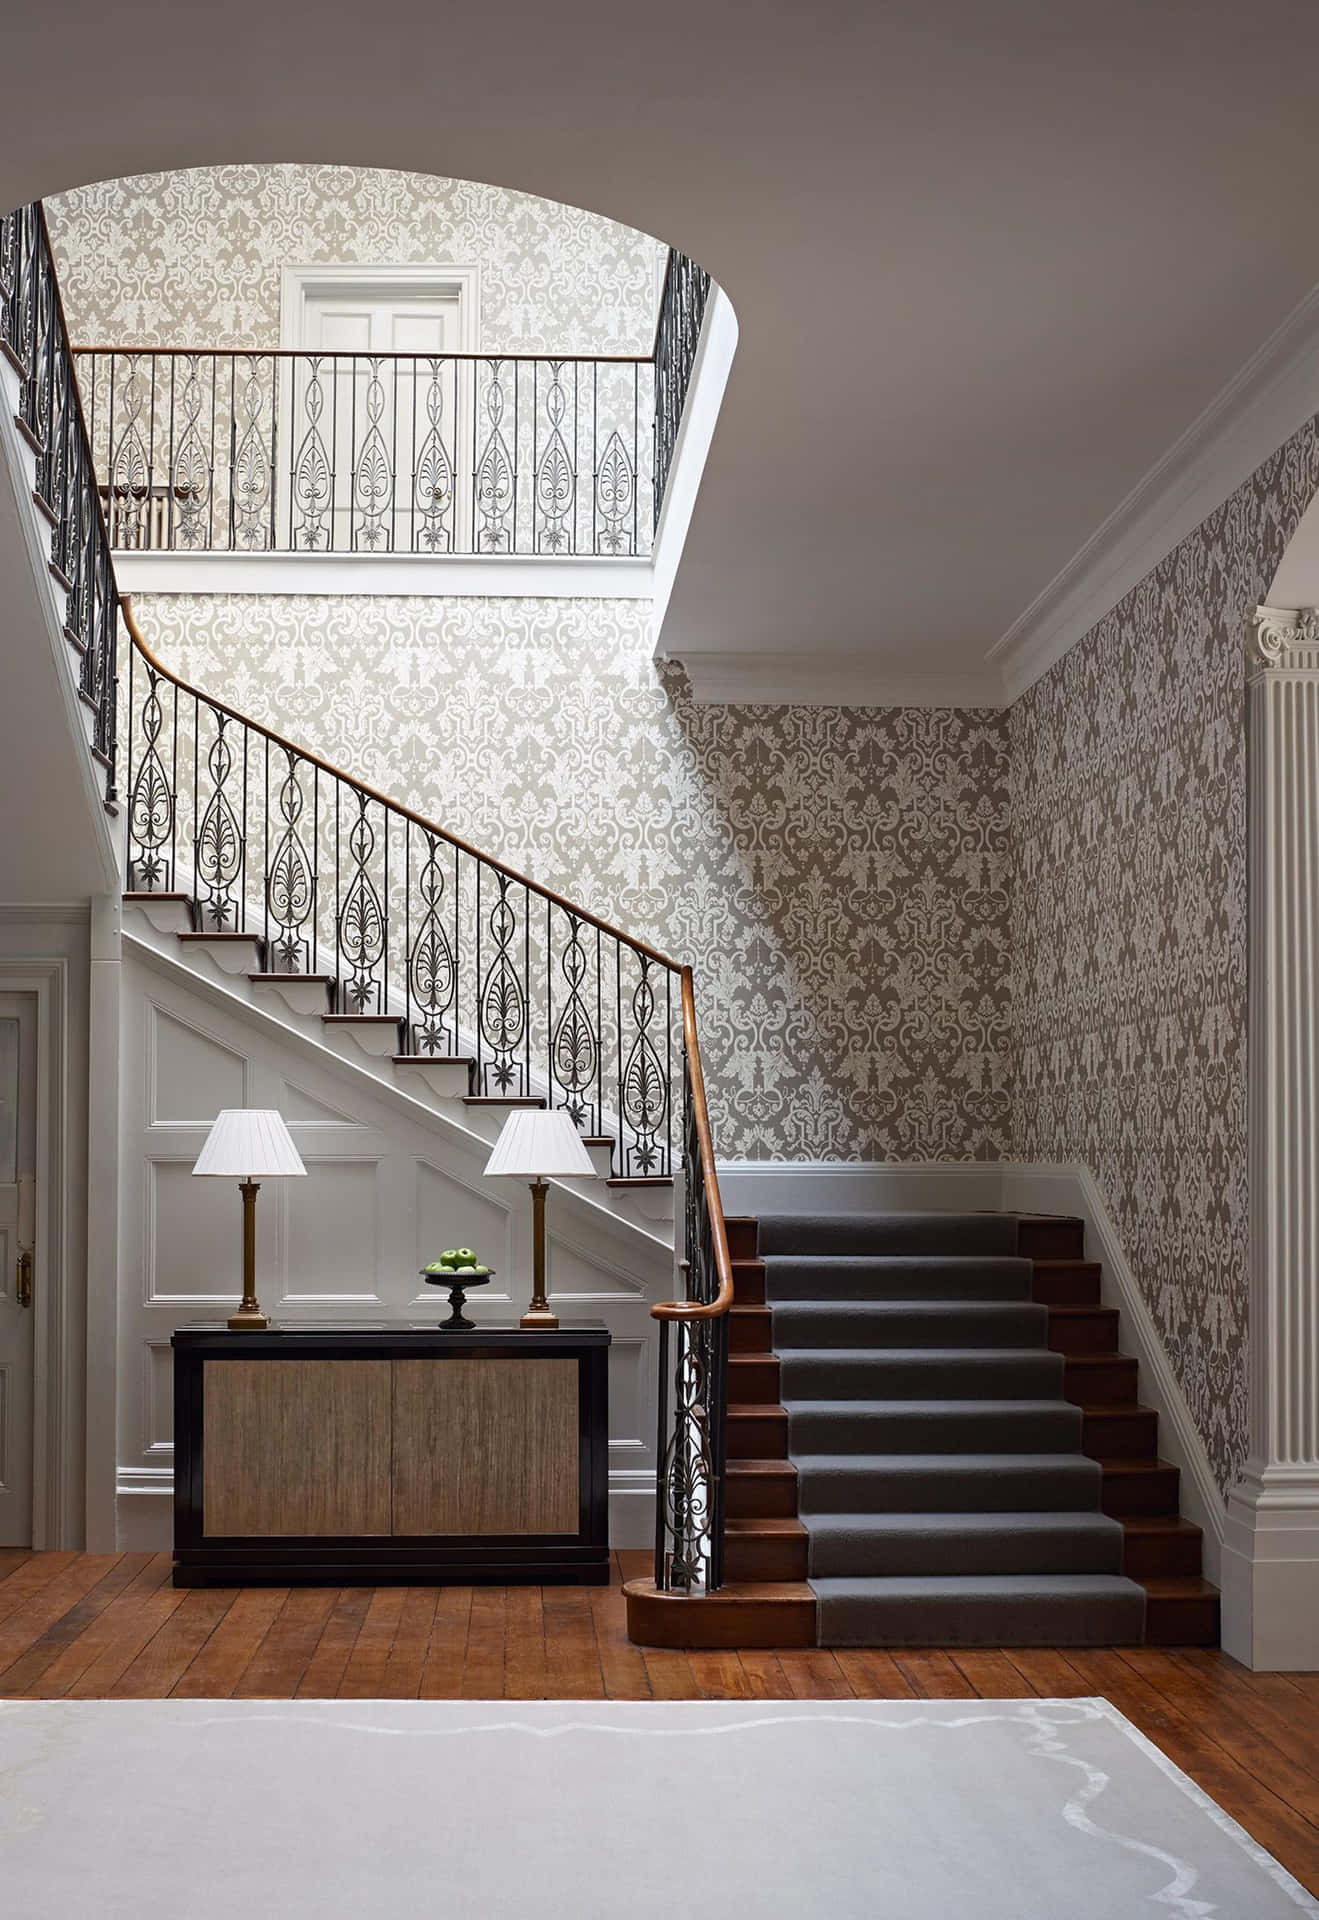 Pleasing Staircase Design Picture